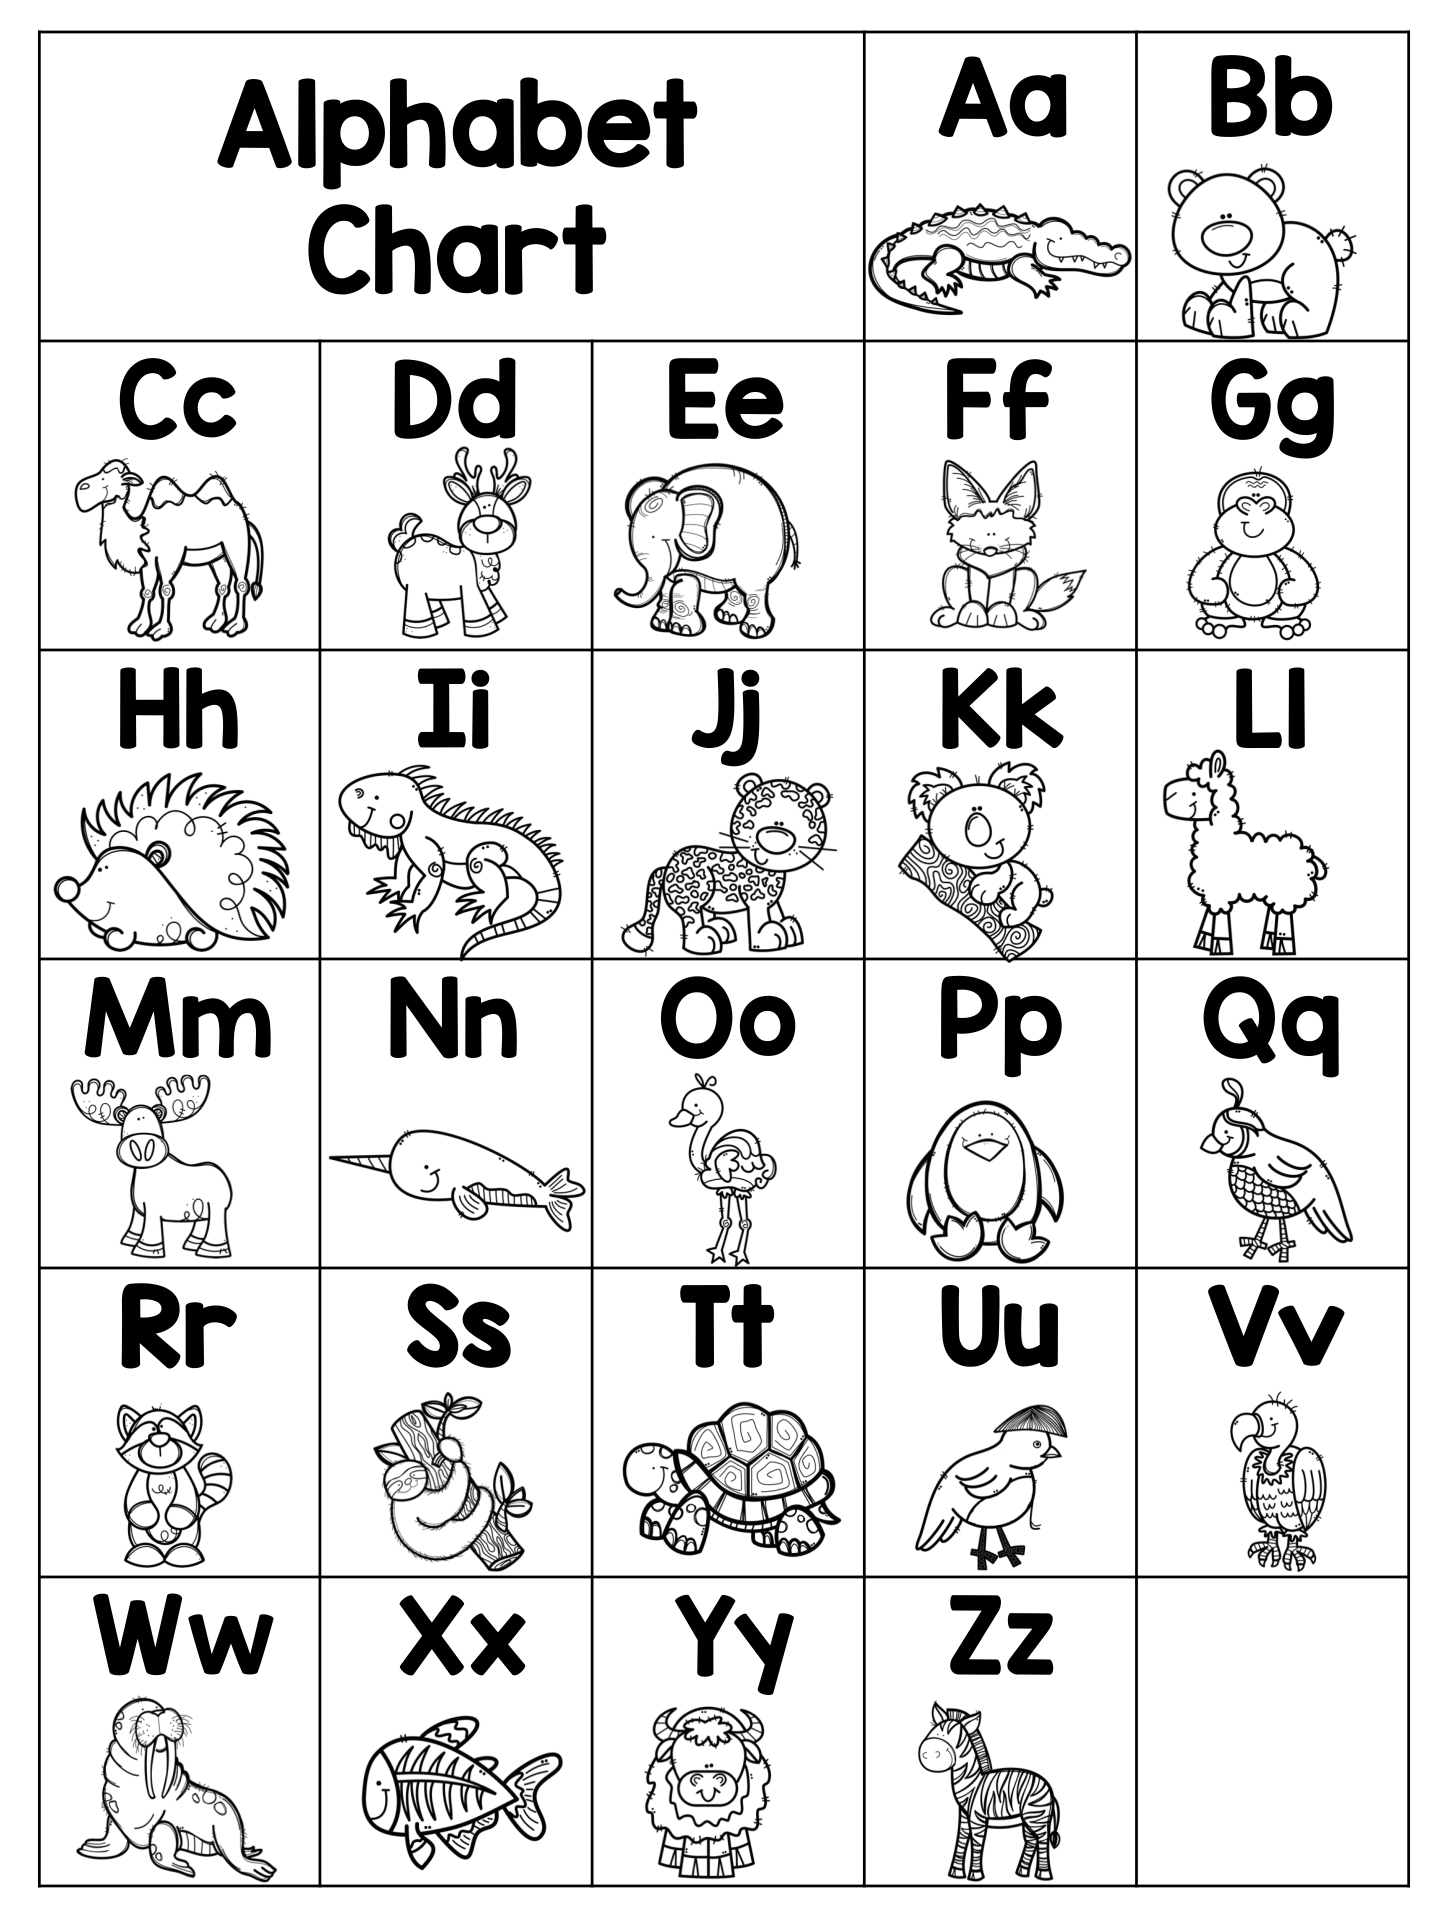 abc-alphabet-chart-pdf-download-printable-form-templates-and-letter